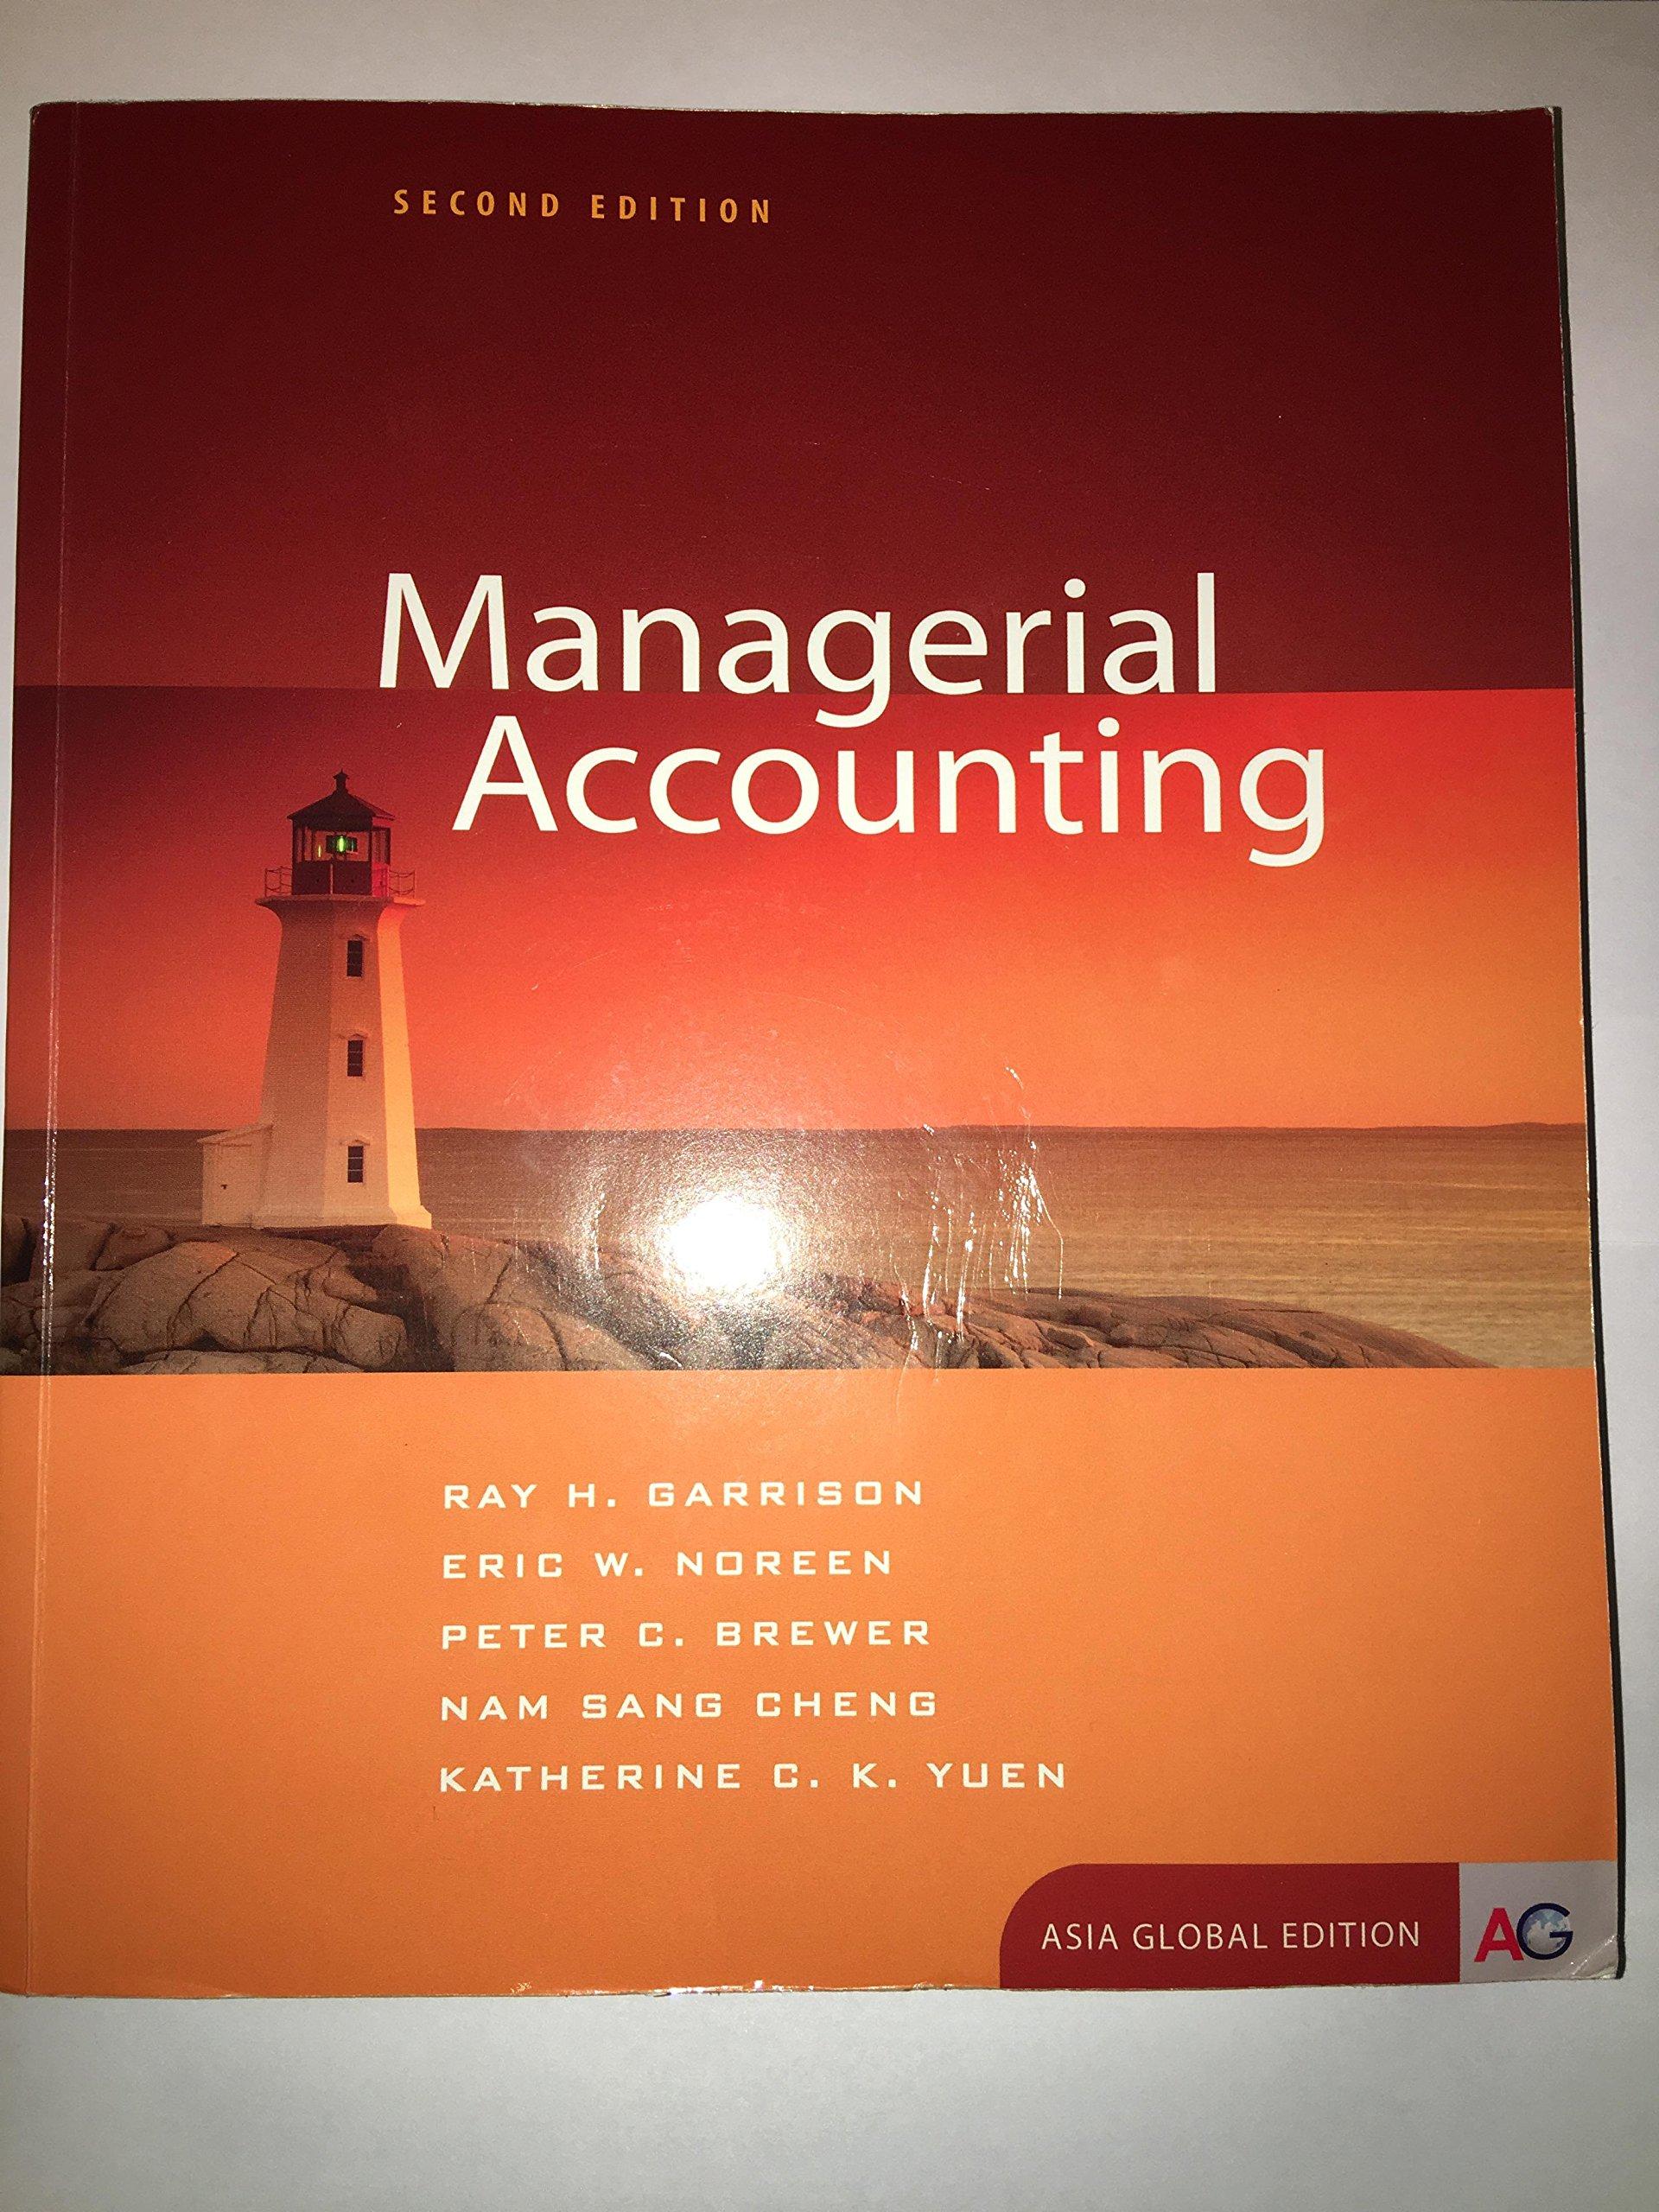 managerial accounting 2nd global edition ray h. garrison, eric w. noreen, peter c. brewer, nam sang cheng